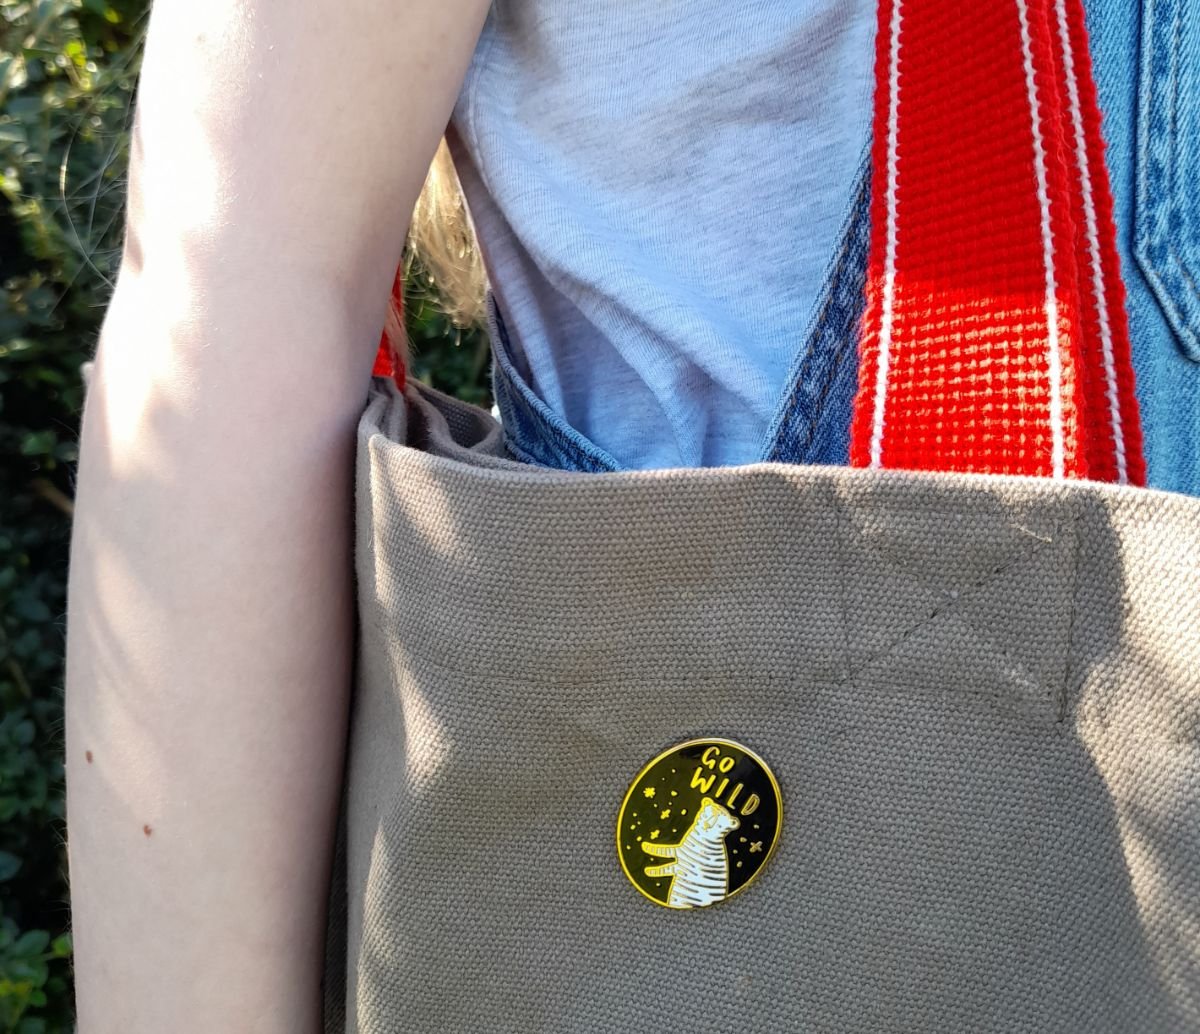 Pin on Bags.